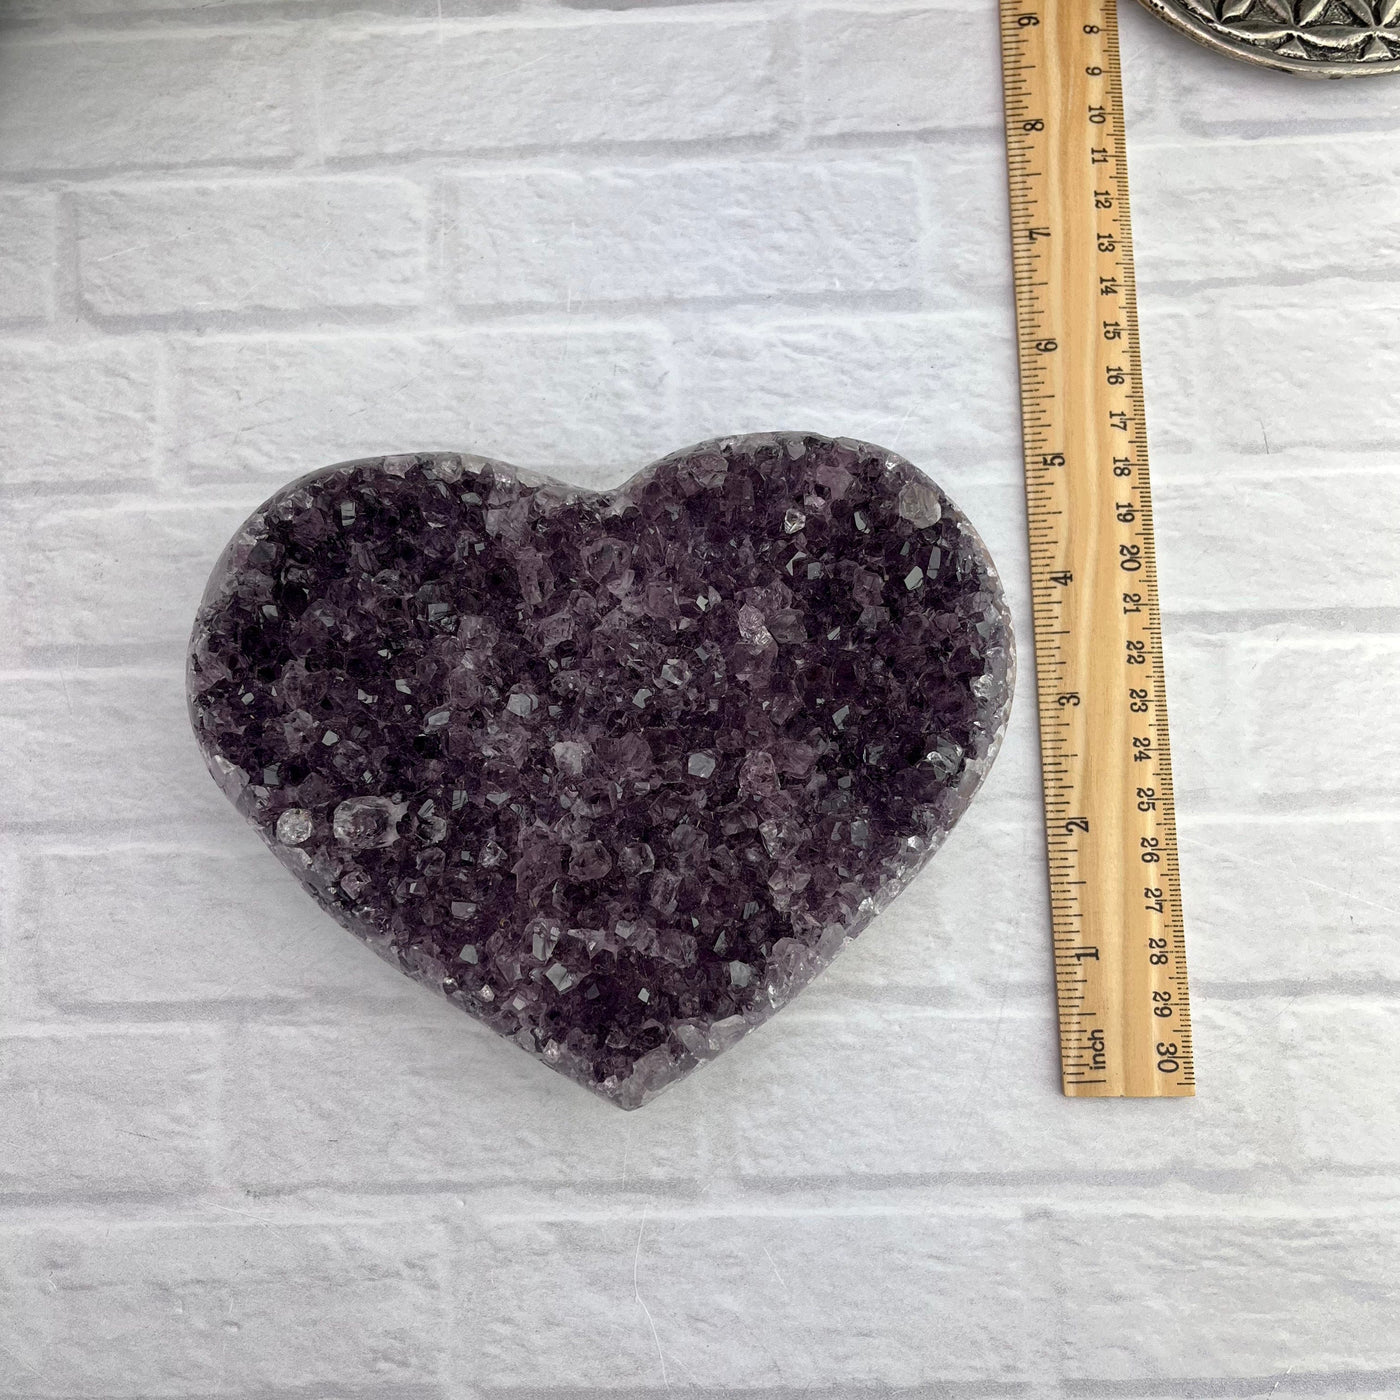  Purple Cluster Amethyst Druzy Heart Top view with ruler for size reference 